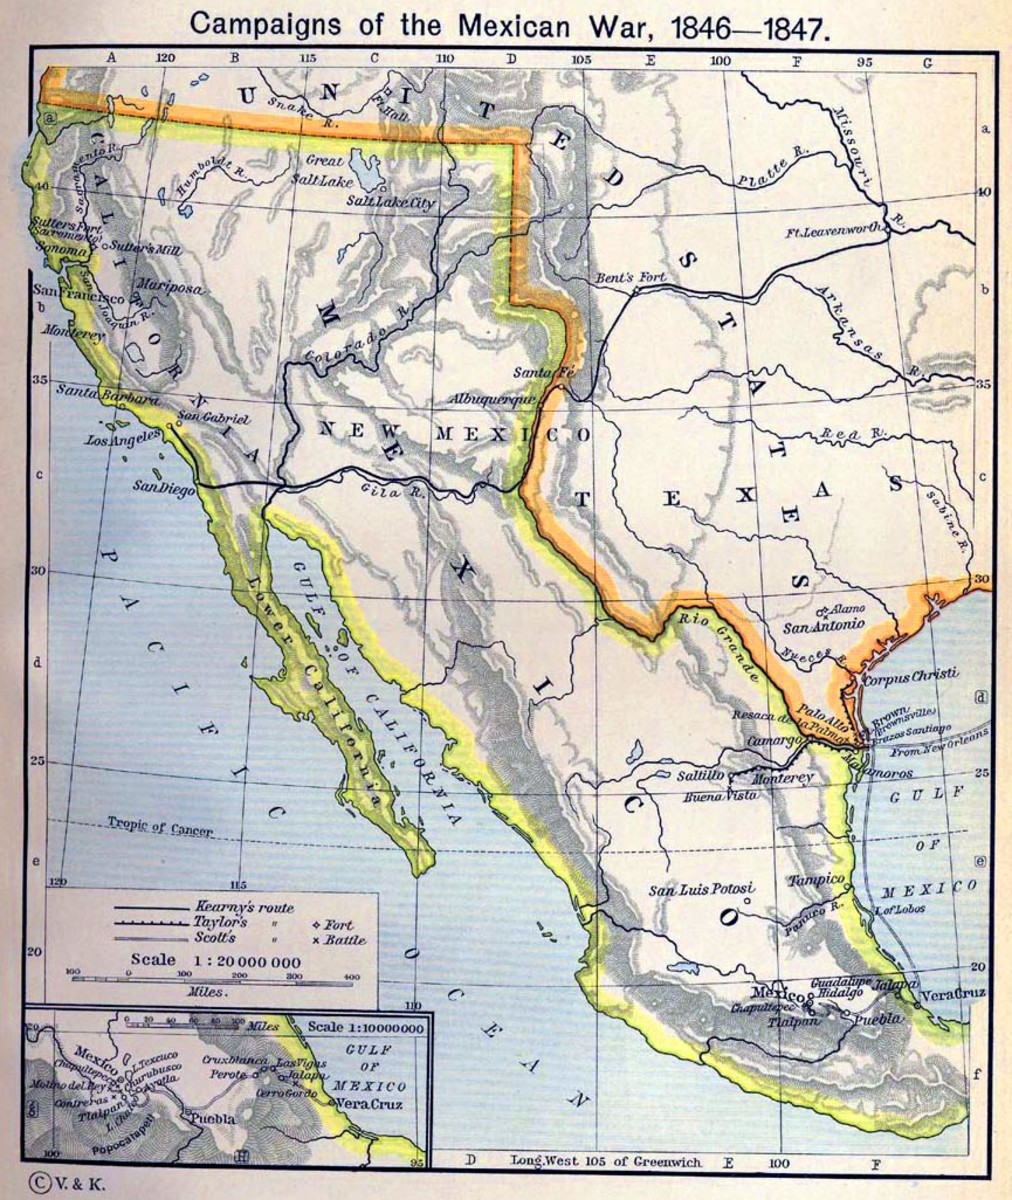 MEXICO BEFORE THE MEXICAN AMERICAN WAR